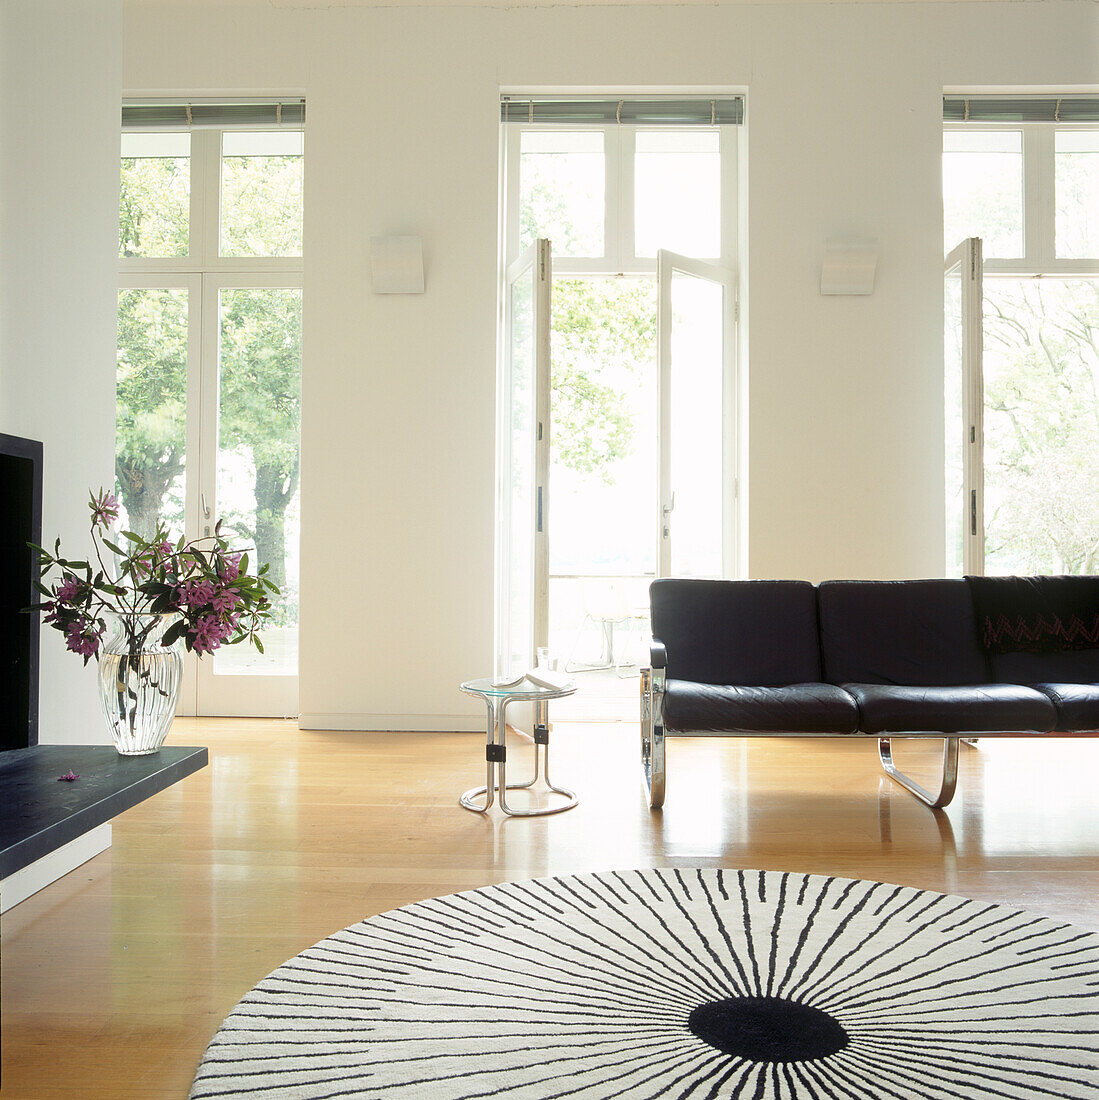 Spacious living room with a black and white circular sunburst rug and 60s black leather furniture